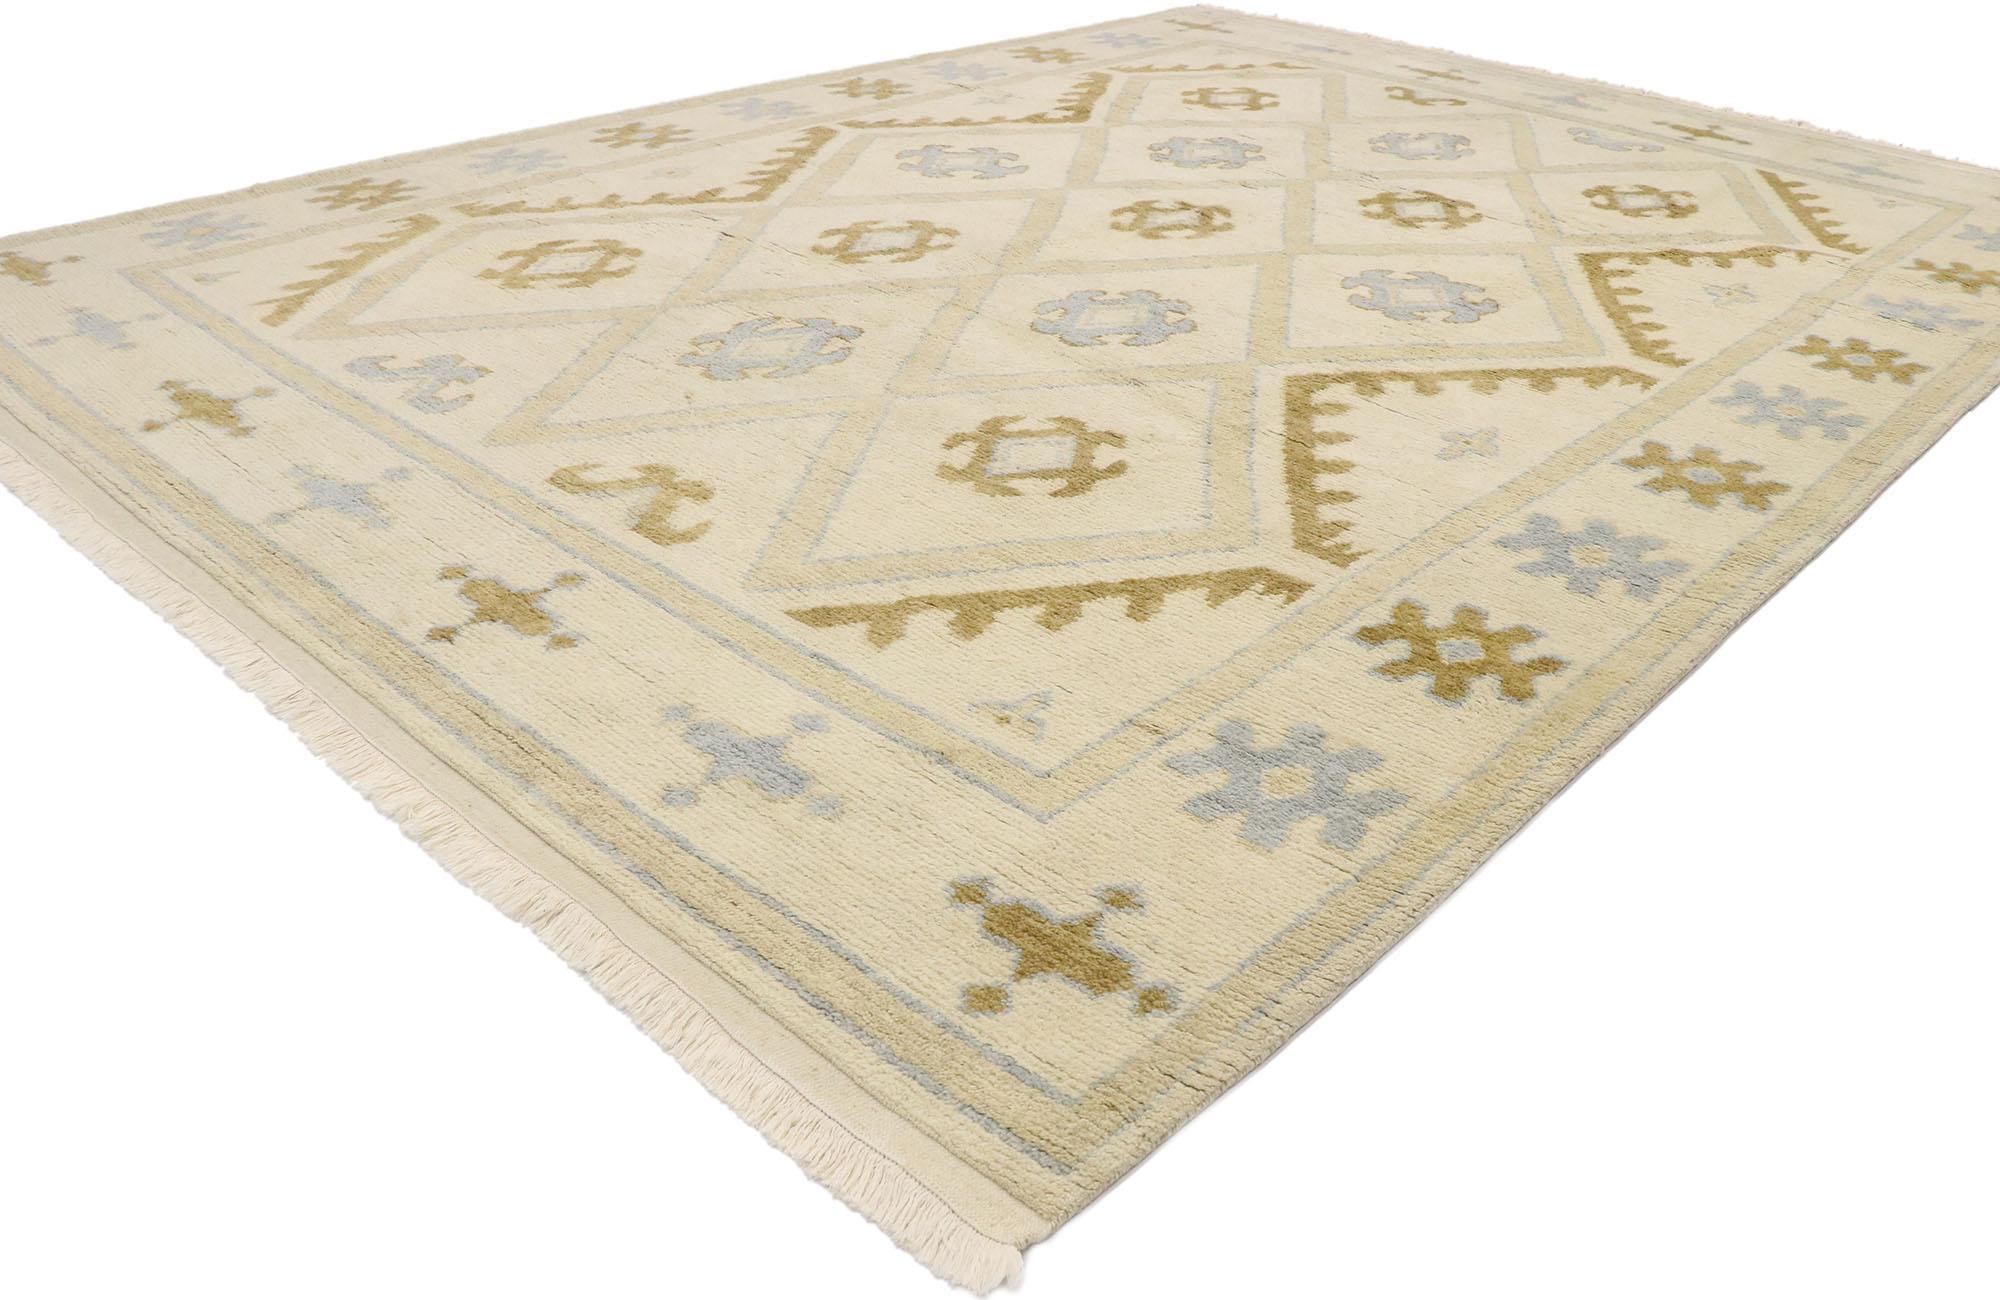 30528, new contemporary Moroccan style rug with Modern style. Warm and inviting, this hand knotted wool new contemporary Moroccan rug features an all-over diamond lattice pattern spread across an abrashed ecru-beige field. The lines of this piece